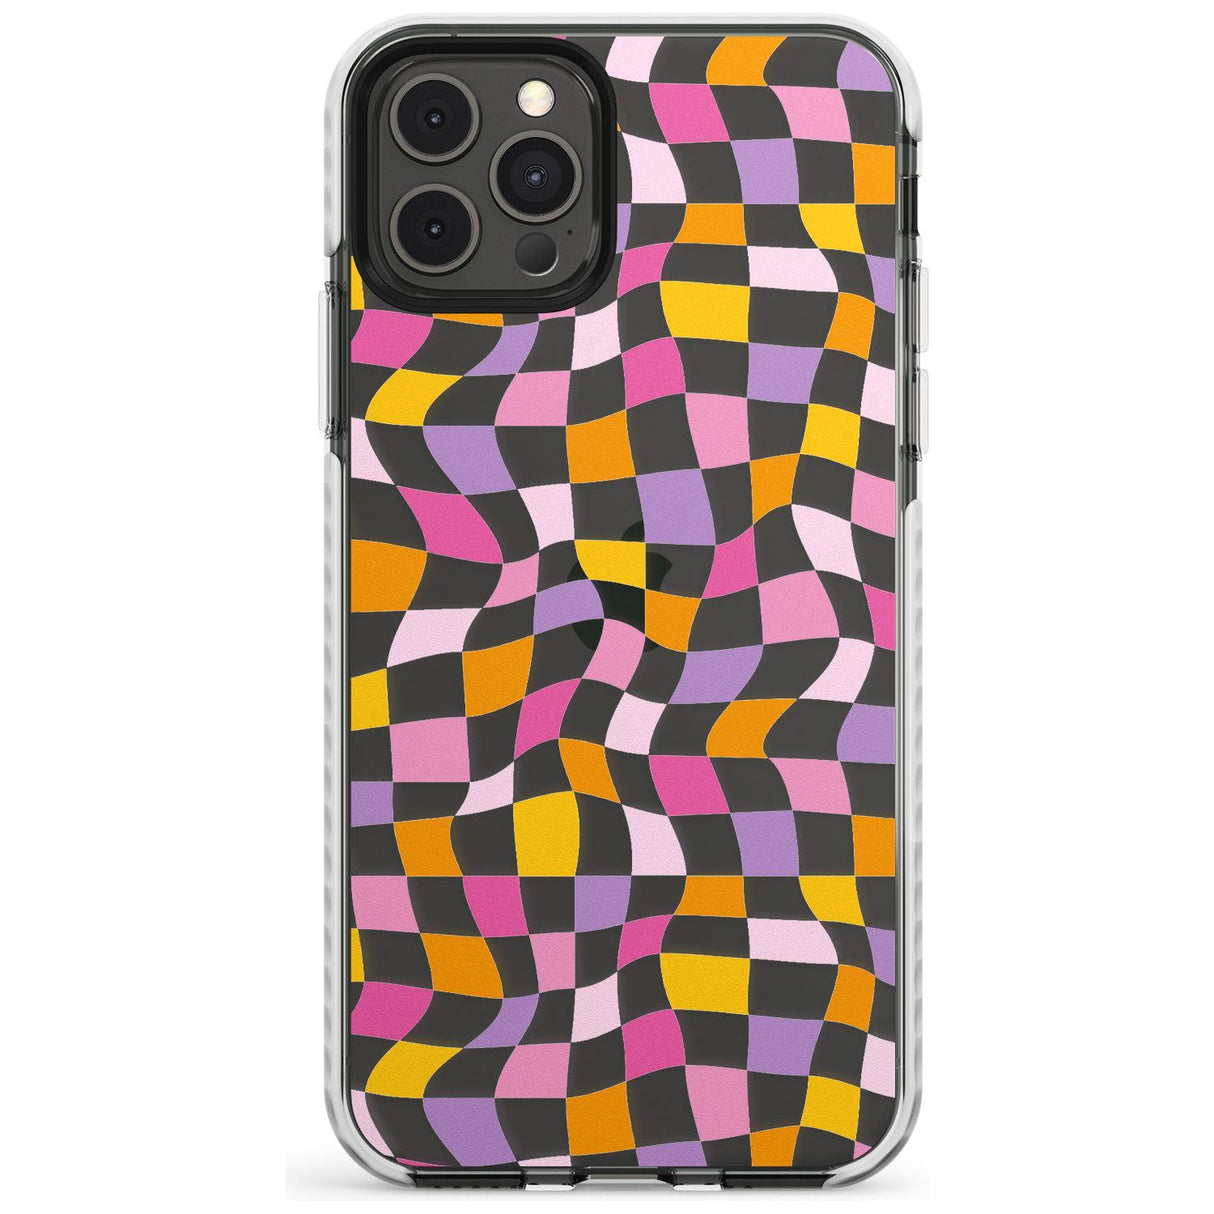 Wonky Squares Pattern Impact Phone Case for iPhone 11 Pro Max